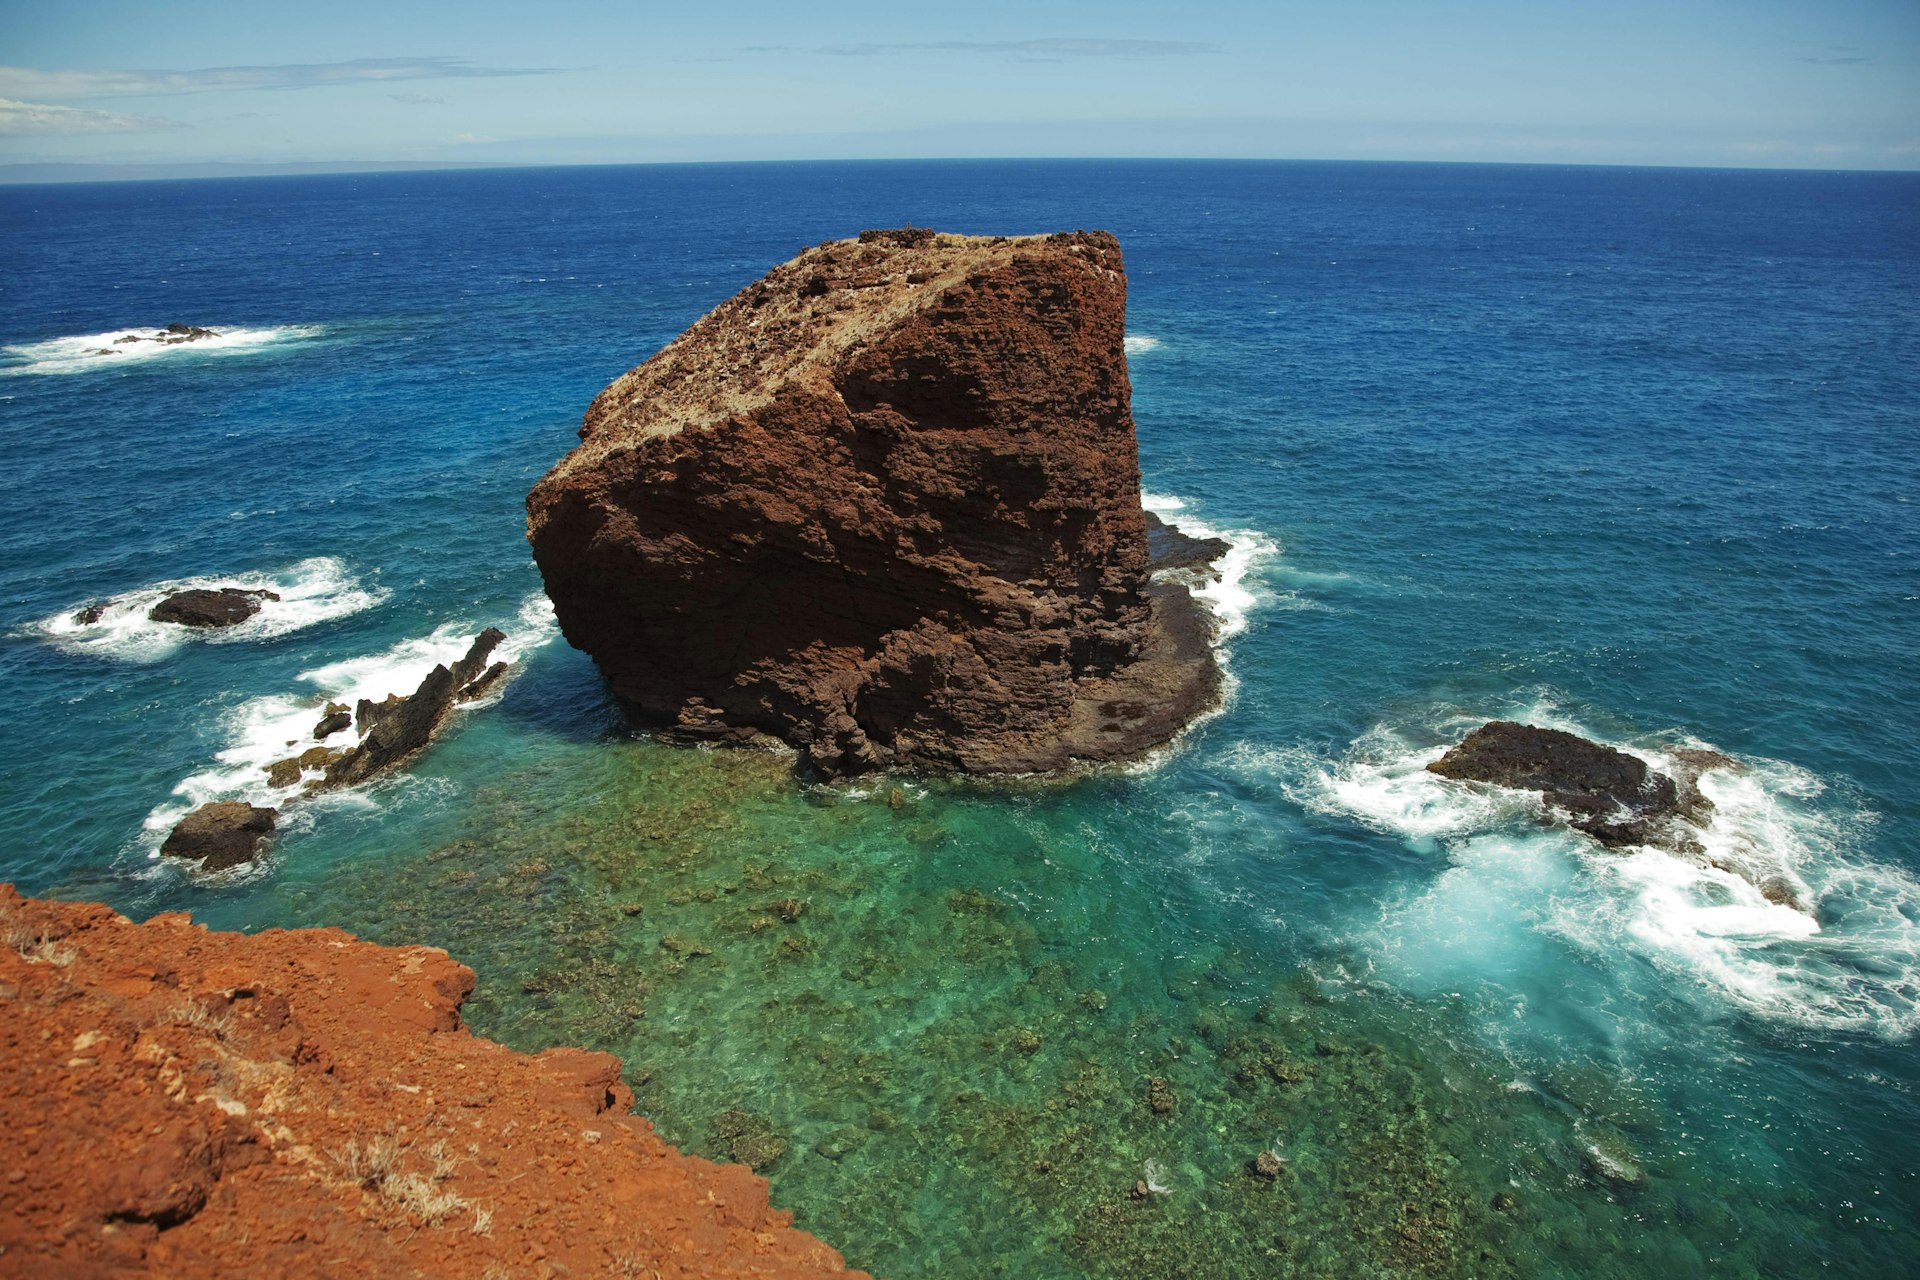 Legend has it that Sweetheart Rock near Lana‘i was the site where a young warrior plunged to his death after losing his lover to the sea. Image by Ron Dahlquist / Perspectives / Getty